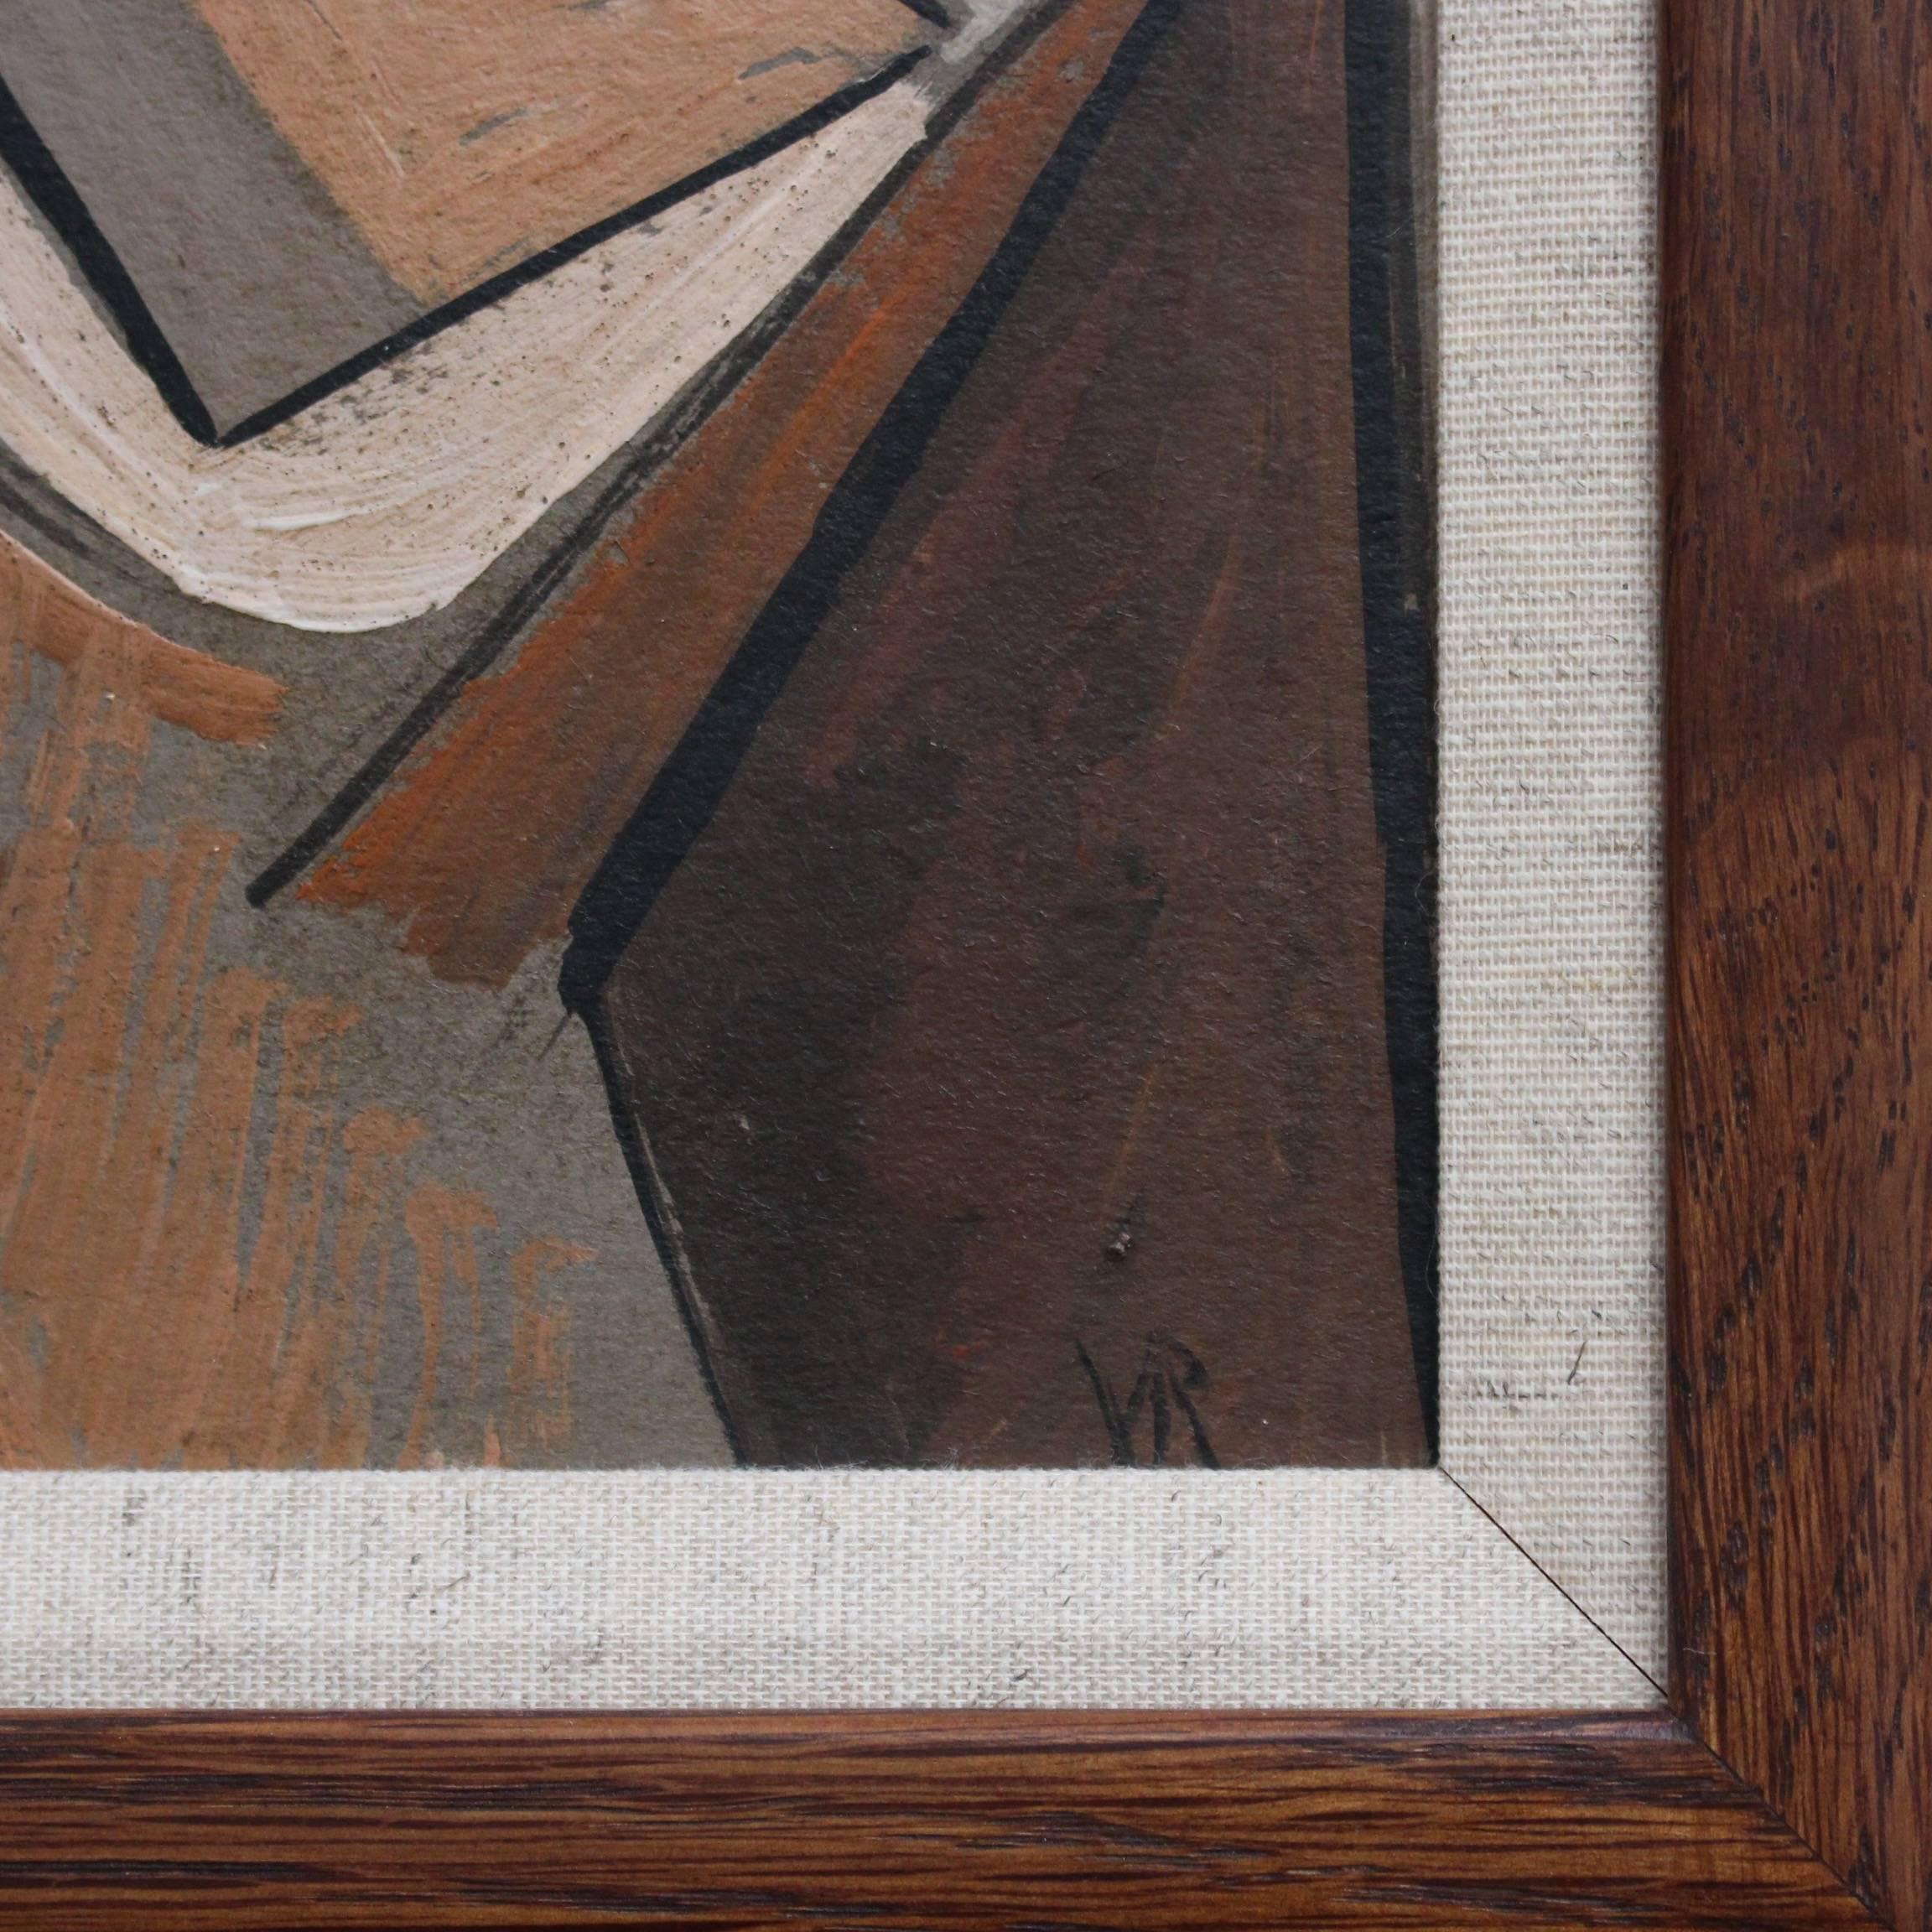 'Portrait of a Young Man' by VR, Mid-Century Modern Cubist Oil Painting, Berlin 4